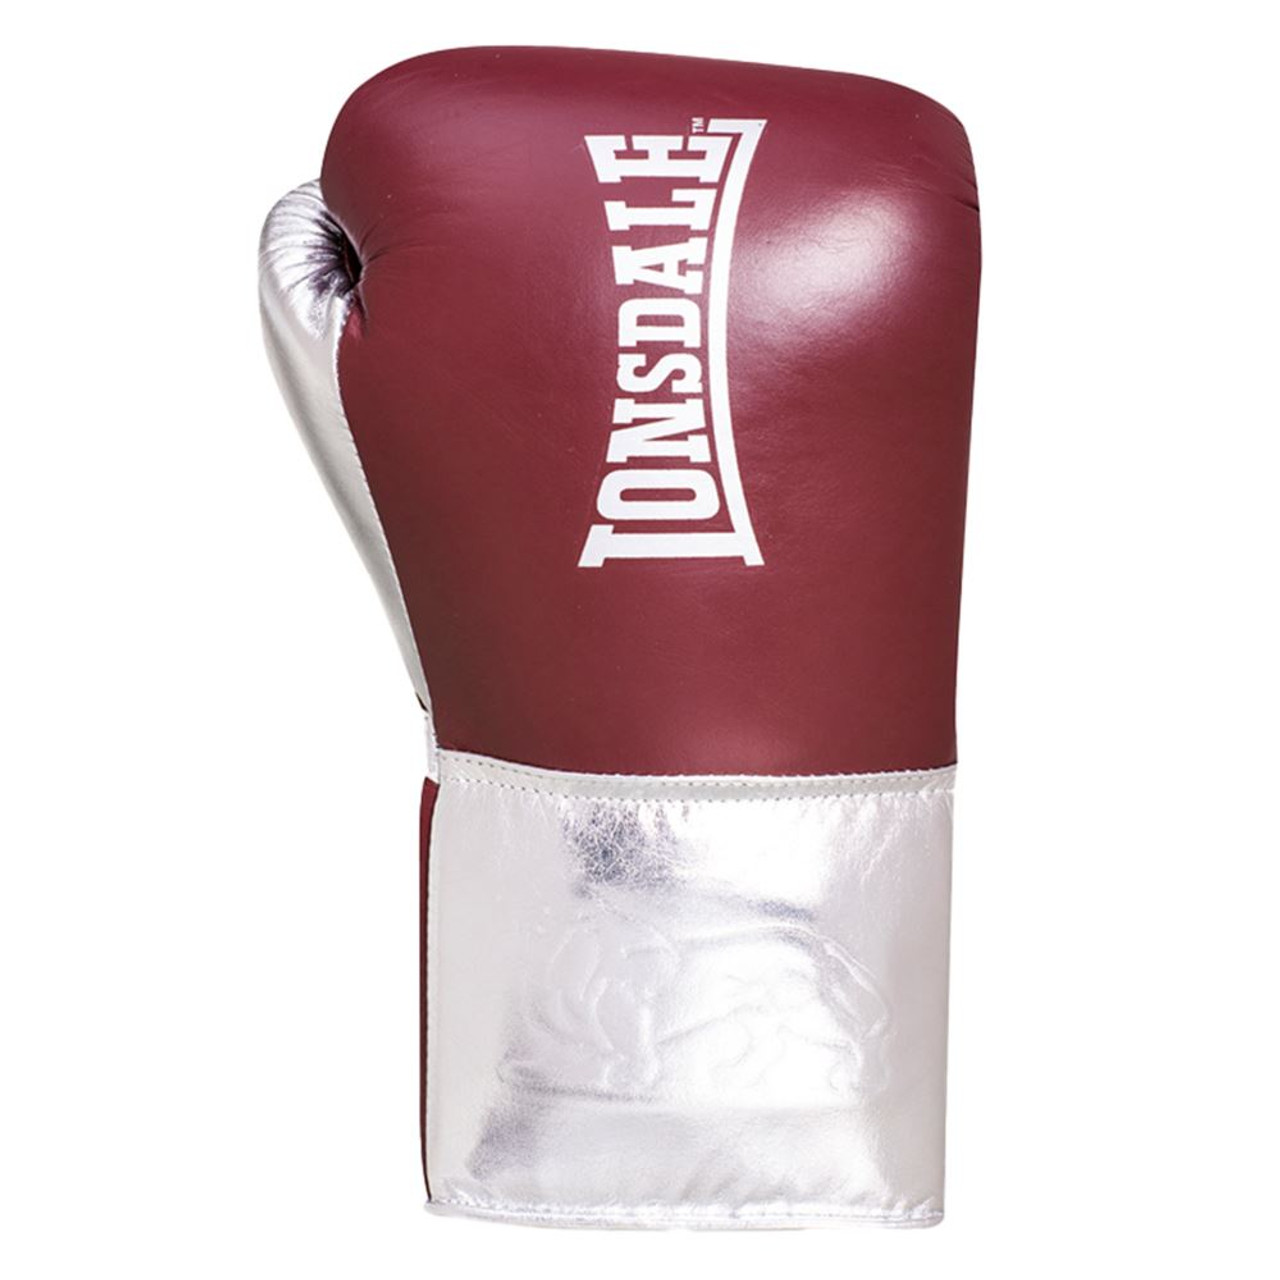 Lonsdale Boxing Glove, Hanging, Red, Copy Space, Sport, Dark